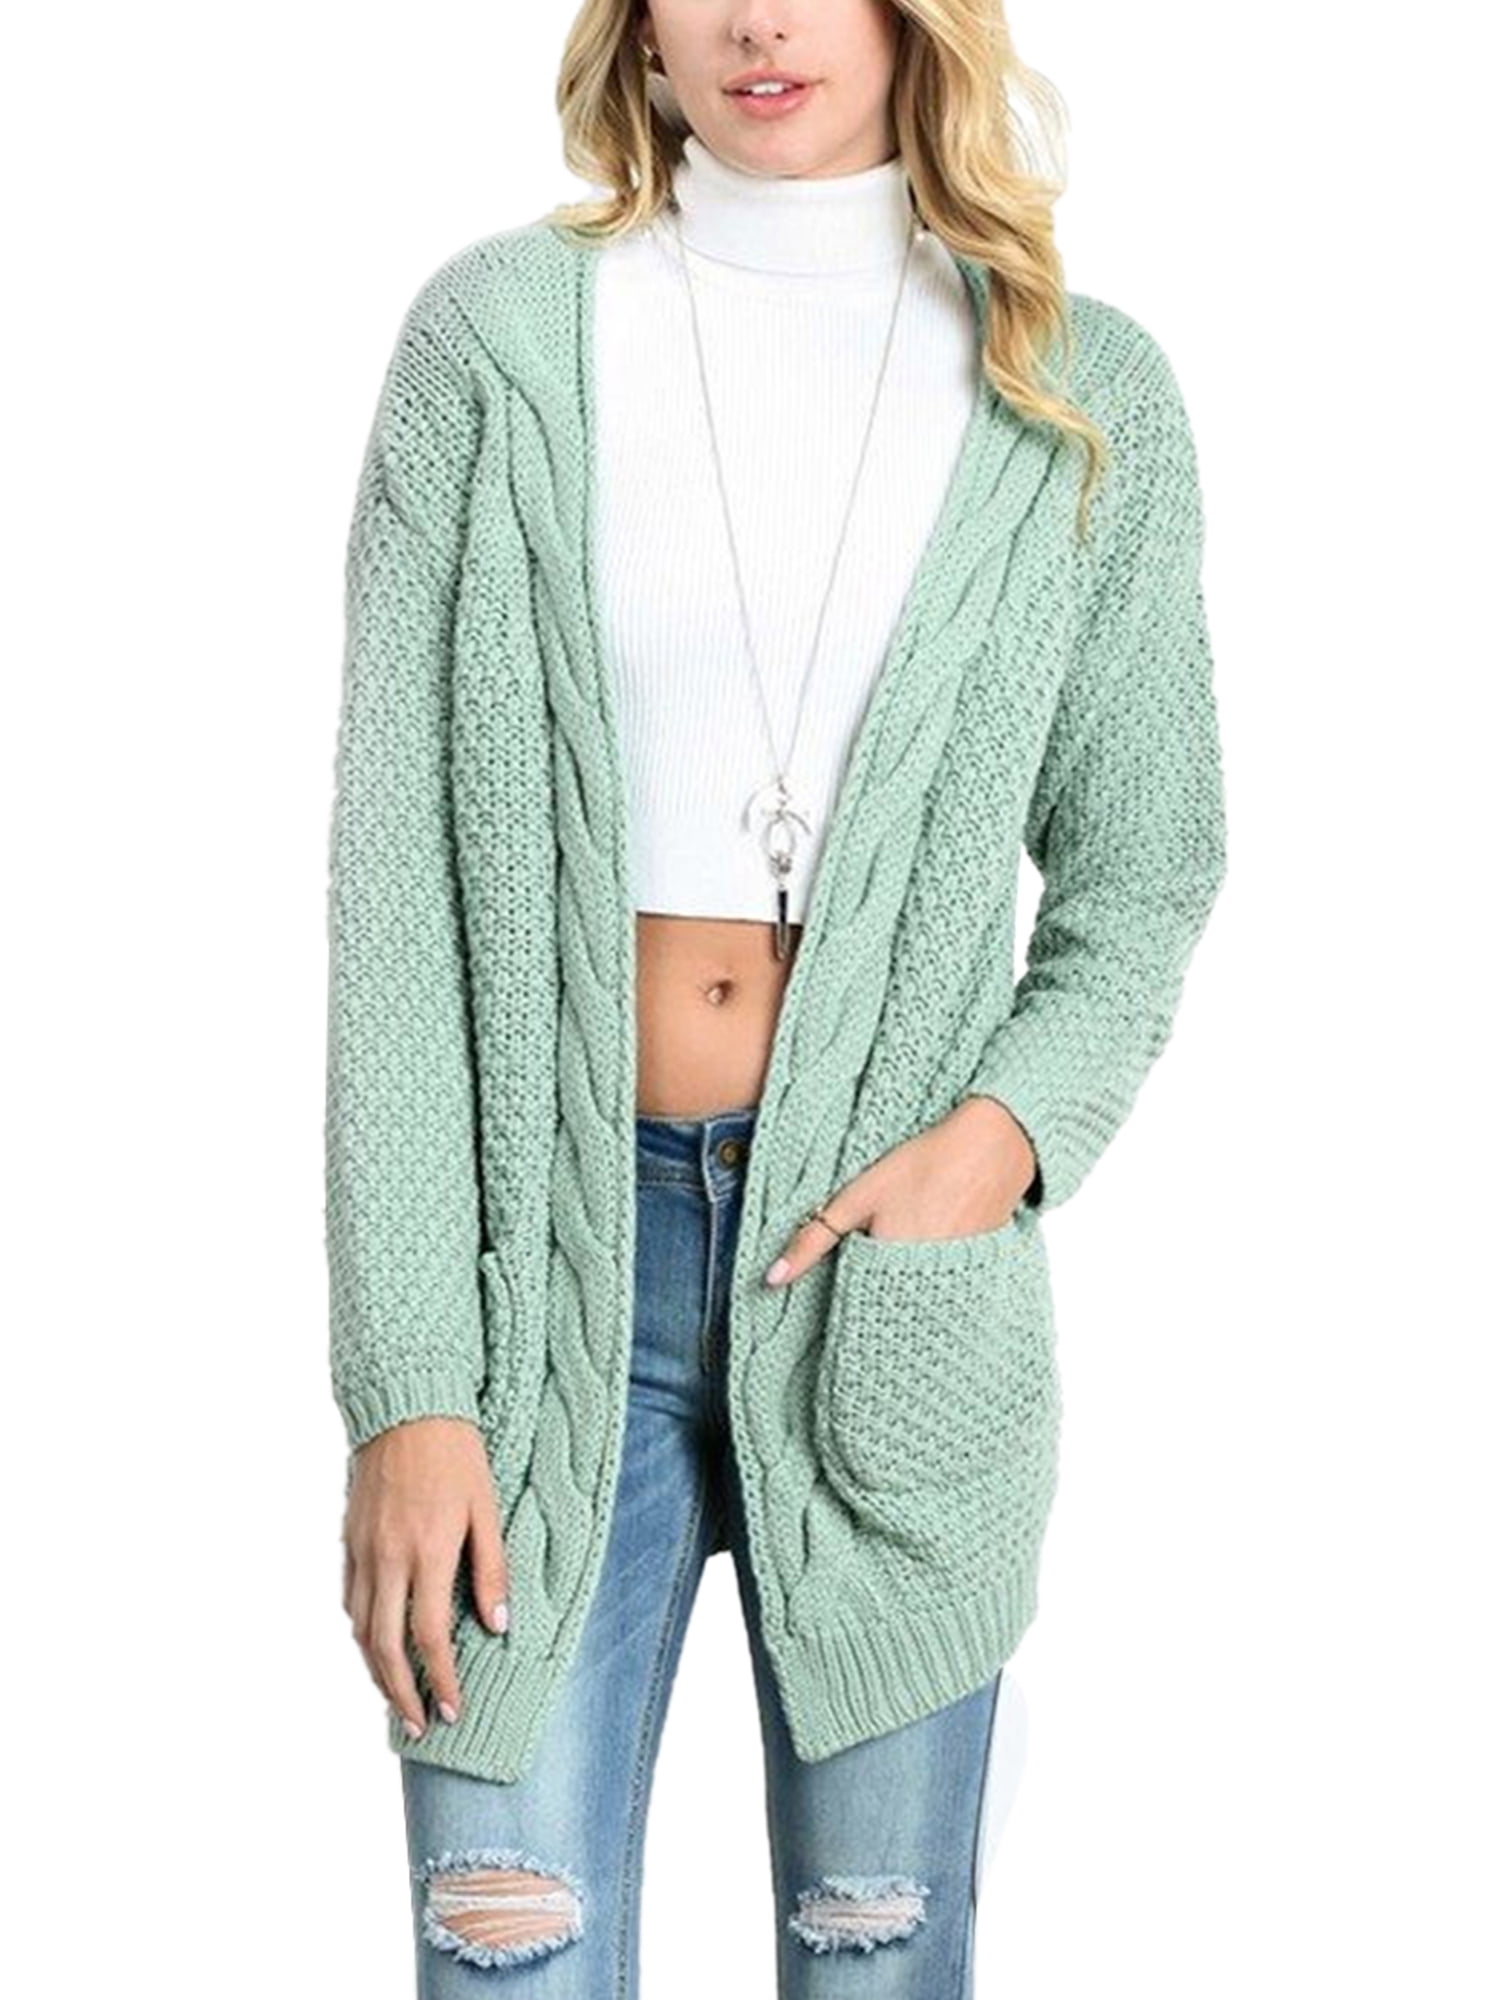 Women's Baggy Cardigan Coat Tops Knitted Sweater Jumper Pullover Jacket Outwear 